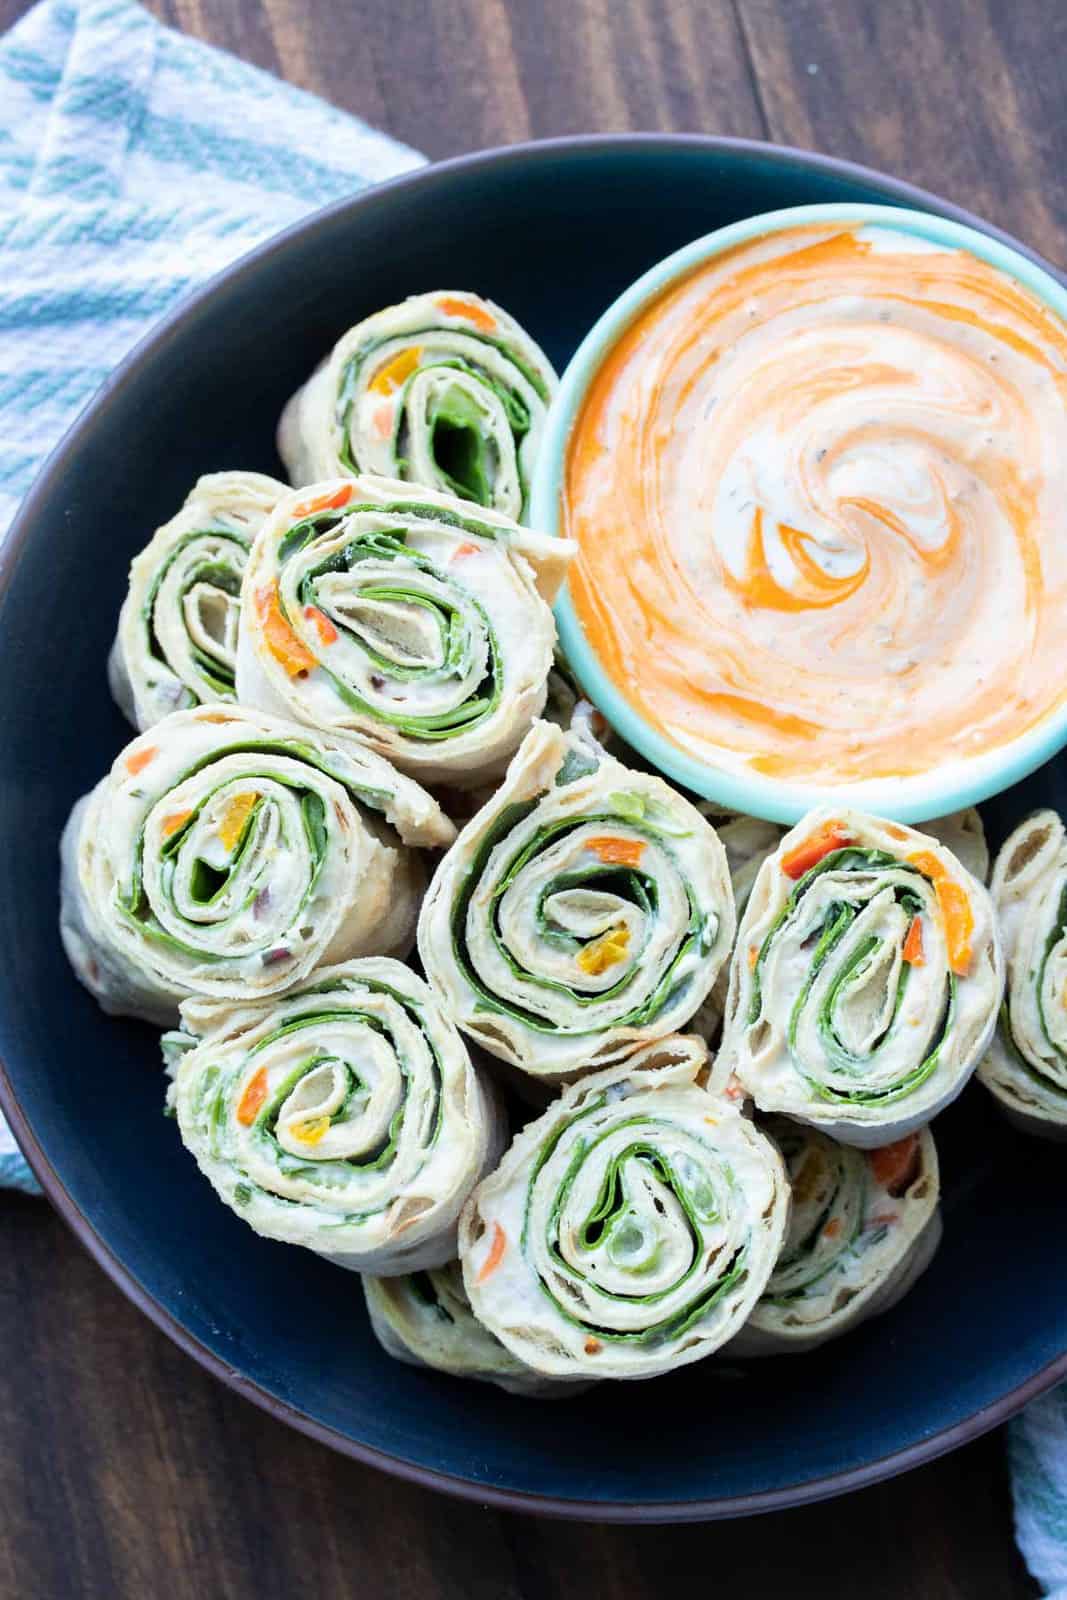 Black plate with pinwheel rolls ups filled with lettuce, salsa and cream cheese